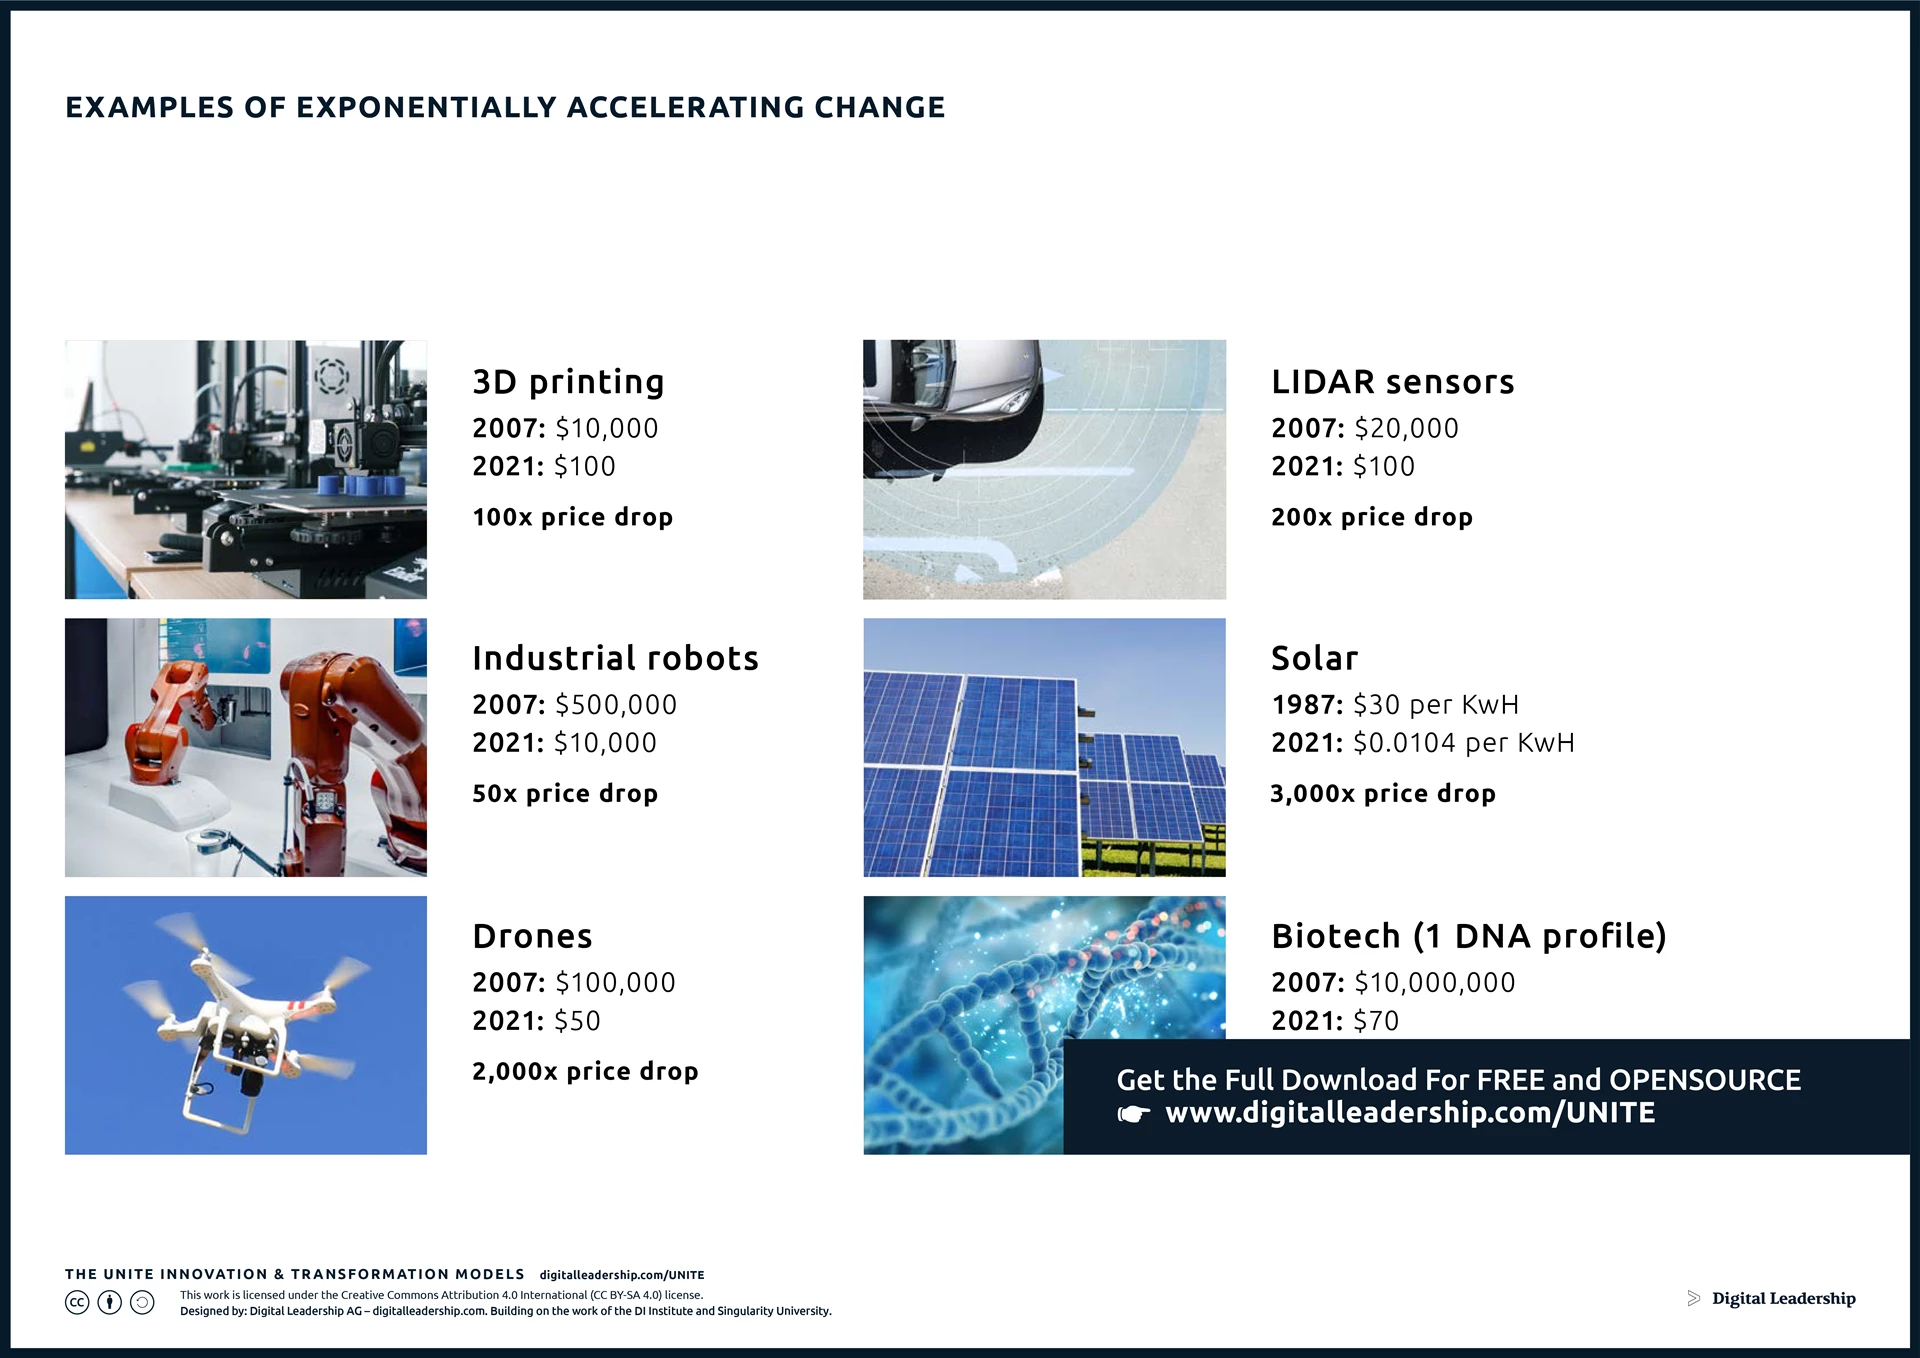 Examples of Exponentially Accelerating Change